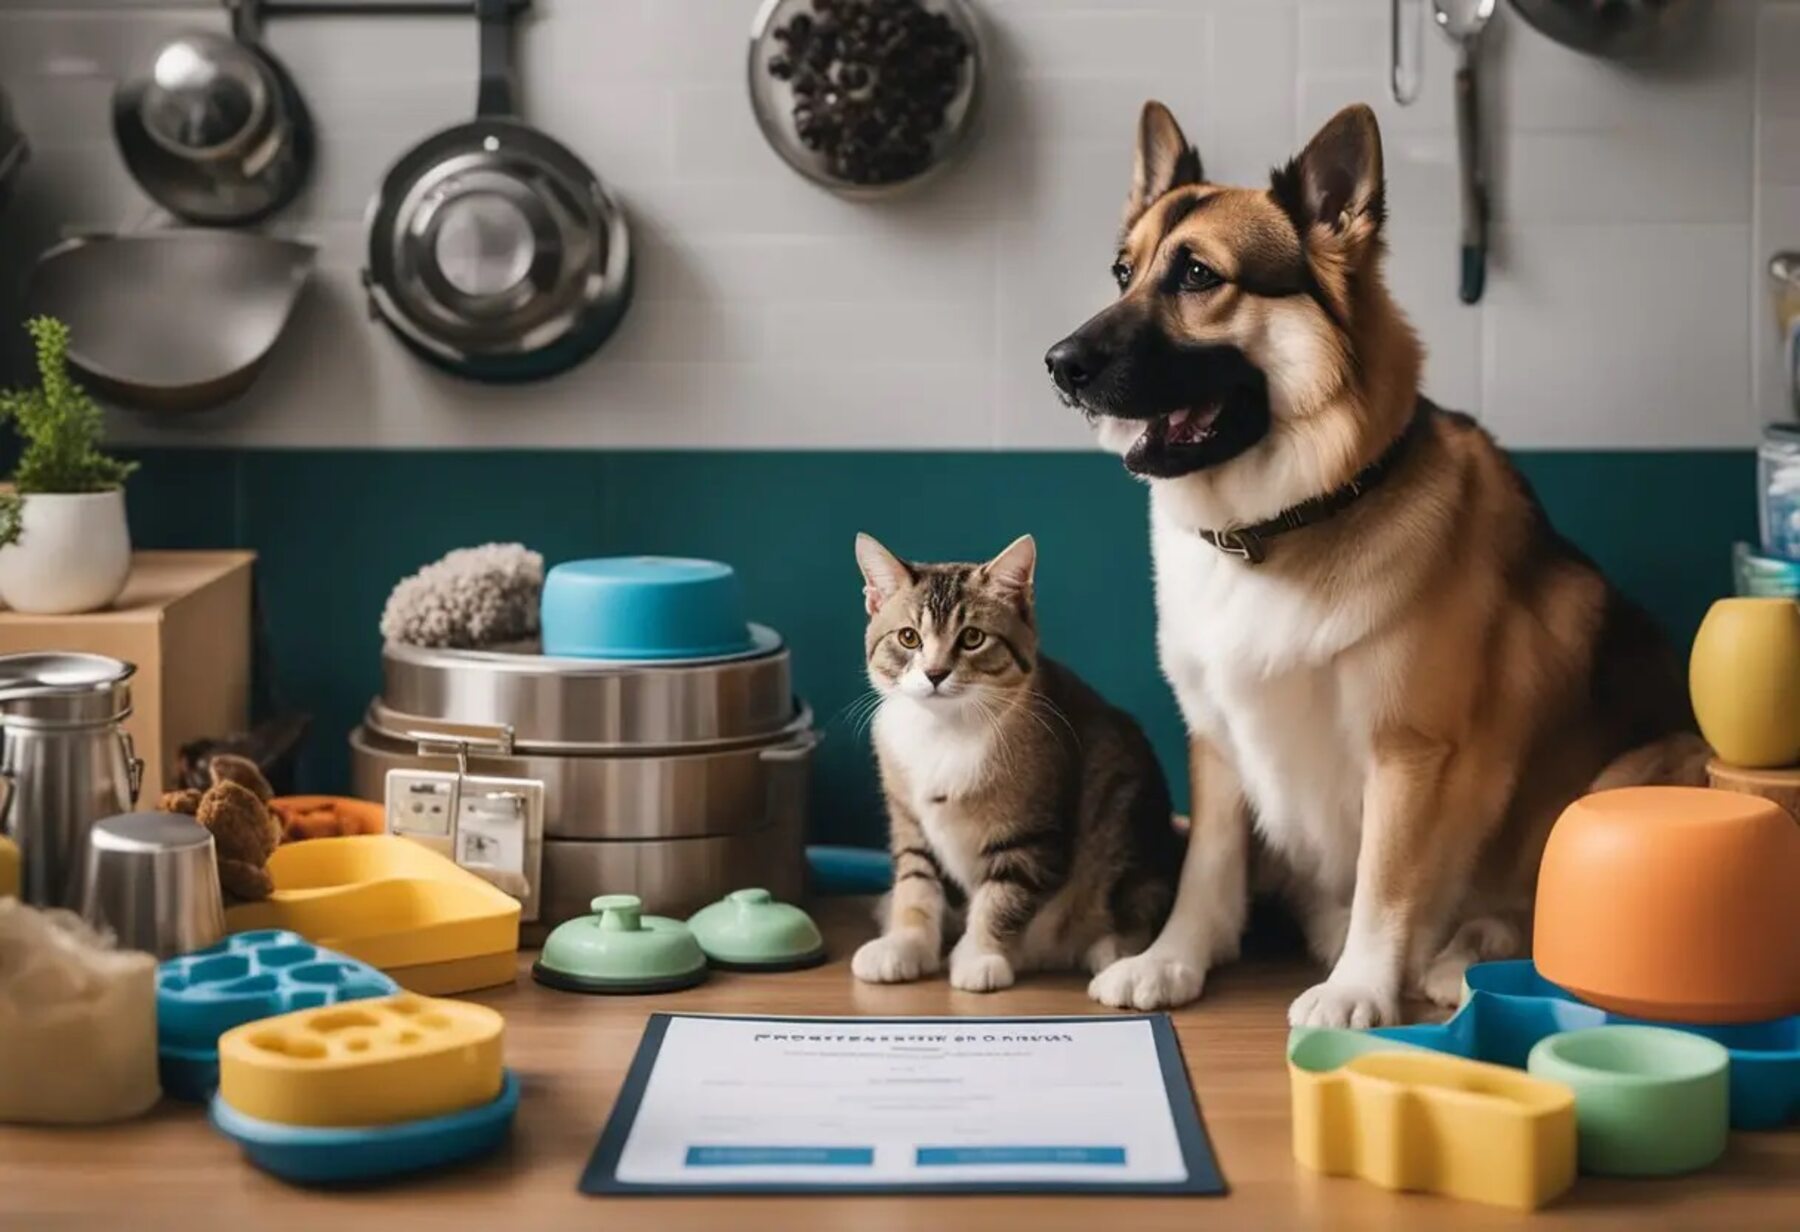 Dog and cat next to pet food bowls and toys